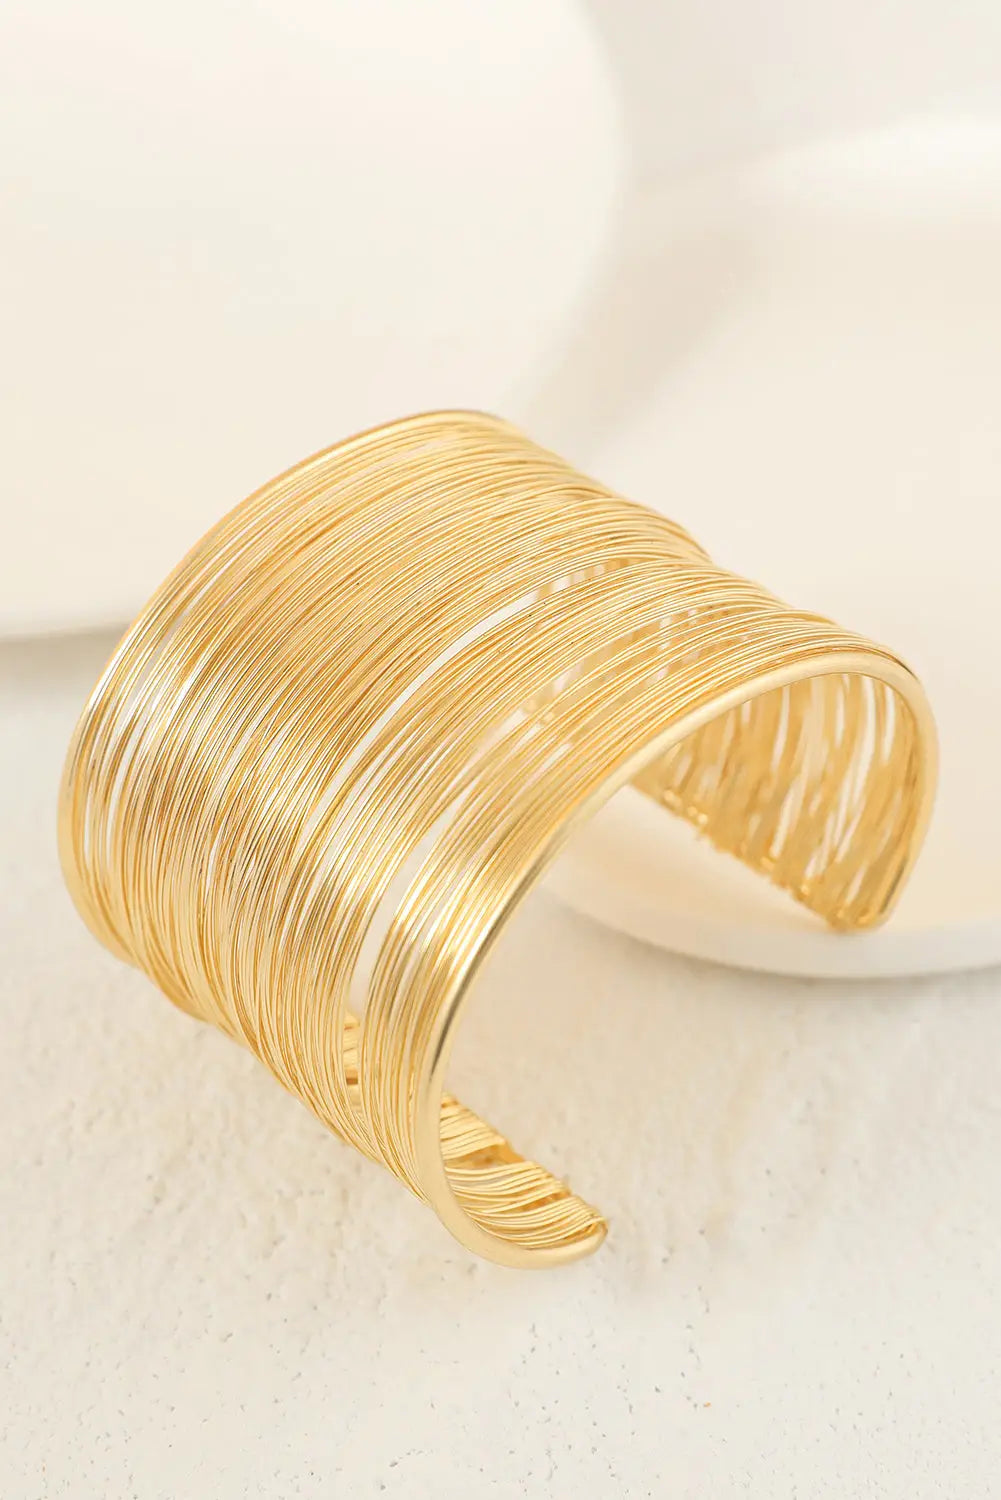 Gold luxury heavy metal high quality open wire bracelet - one size / alloy - accessories